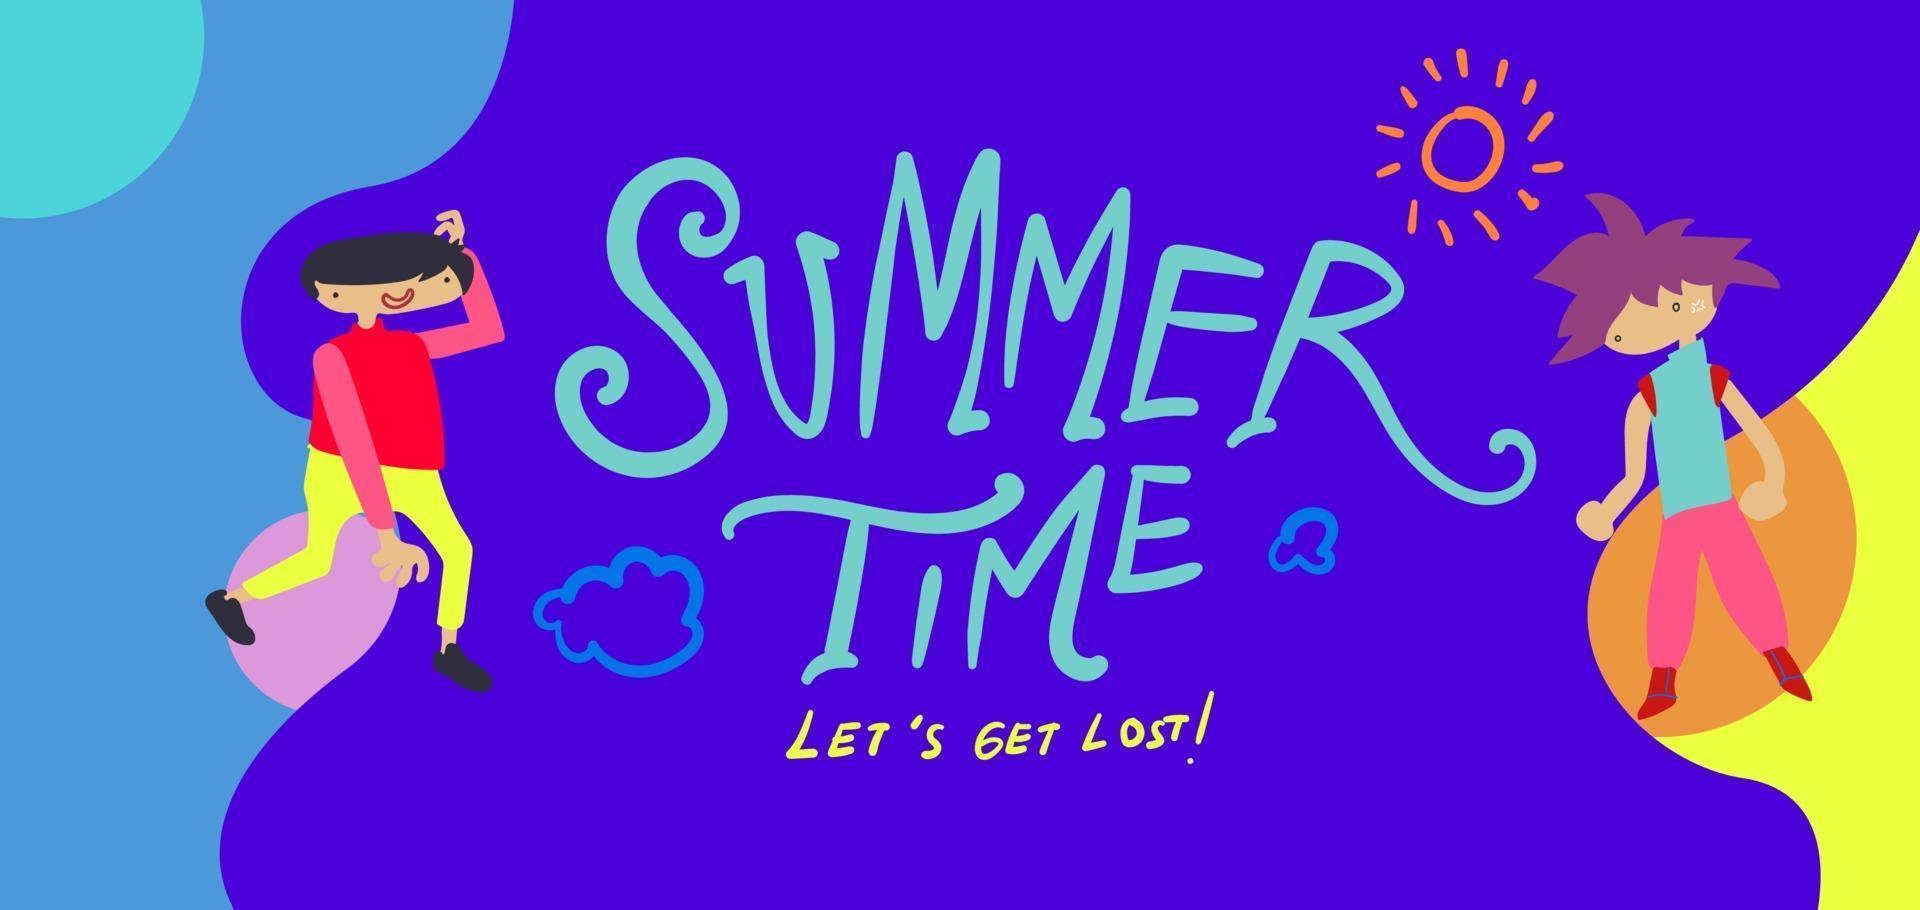 Summer time holiday season banner illustration for kids vacation vector